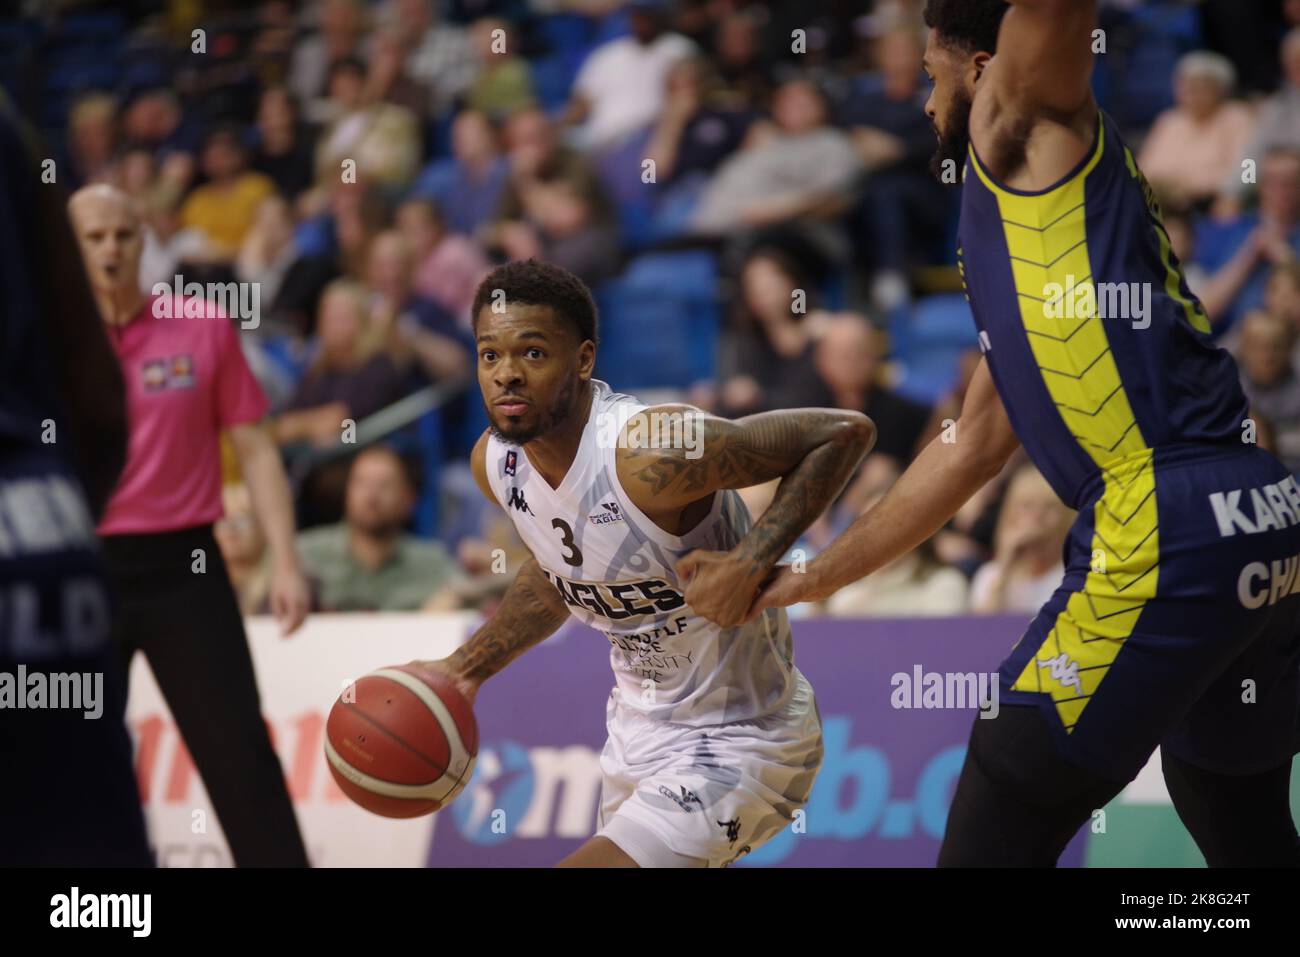 Sheffield, England, 23 October 2022. Javion Hamlet playing for Newcastle Eagles against B. Braun Sheffield Sharks in a BBL match at Ponds Forge. Credit: Colin Edwards/Alamy Live News. Stock Photo